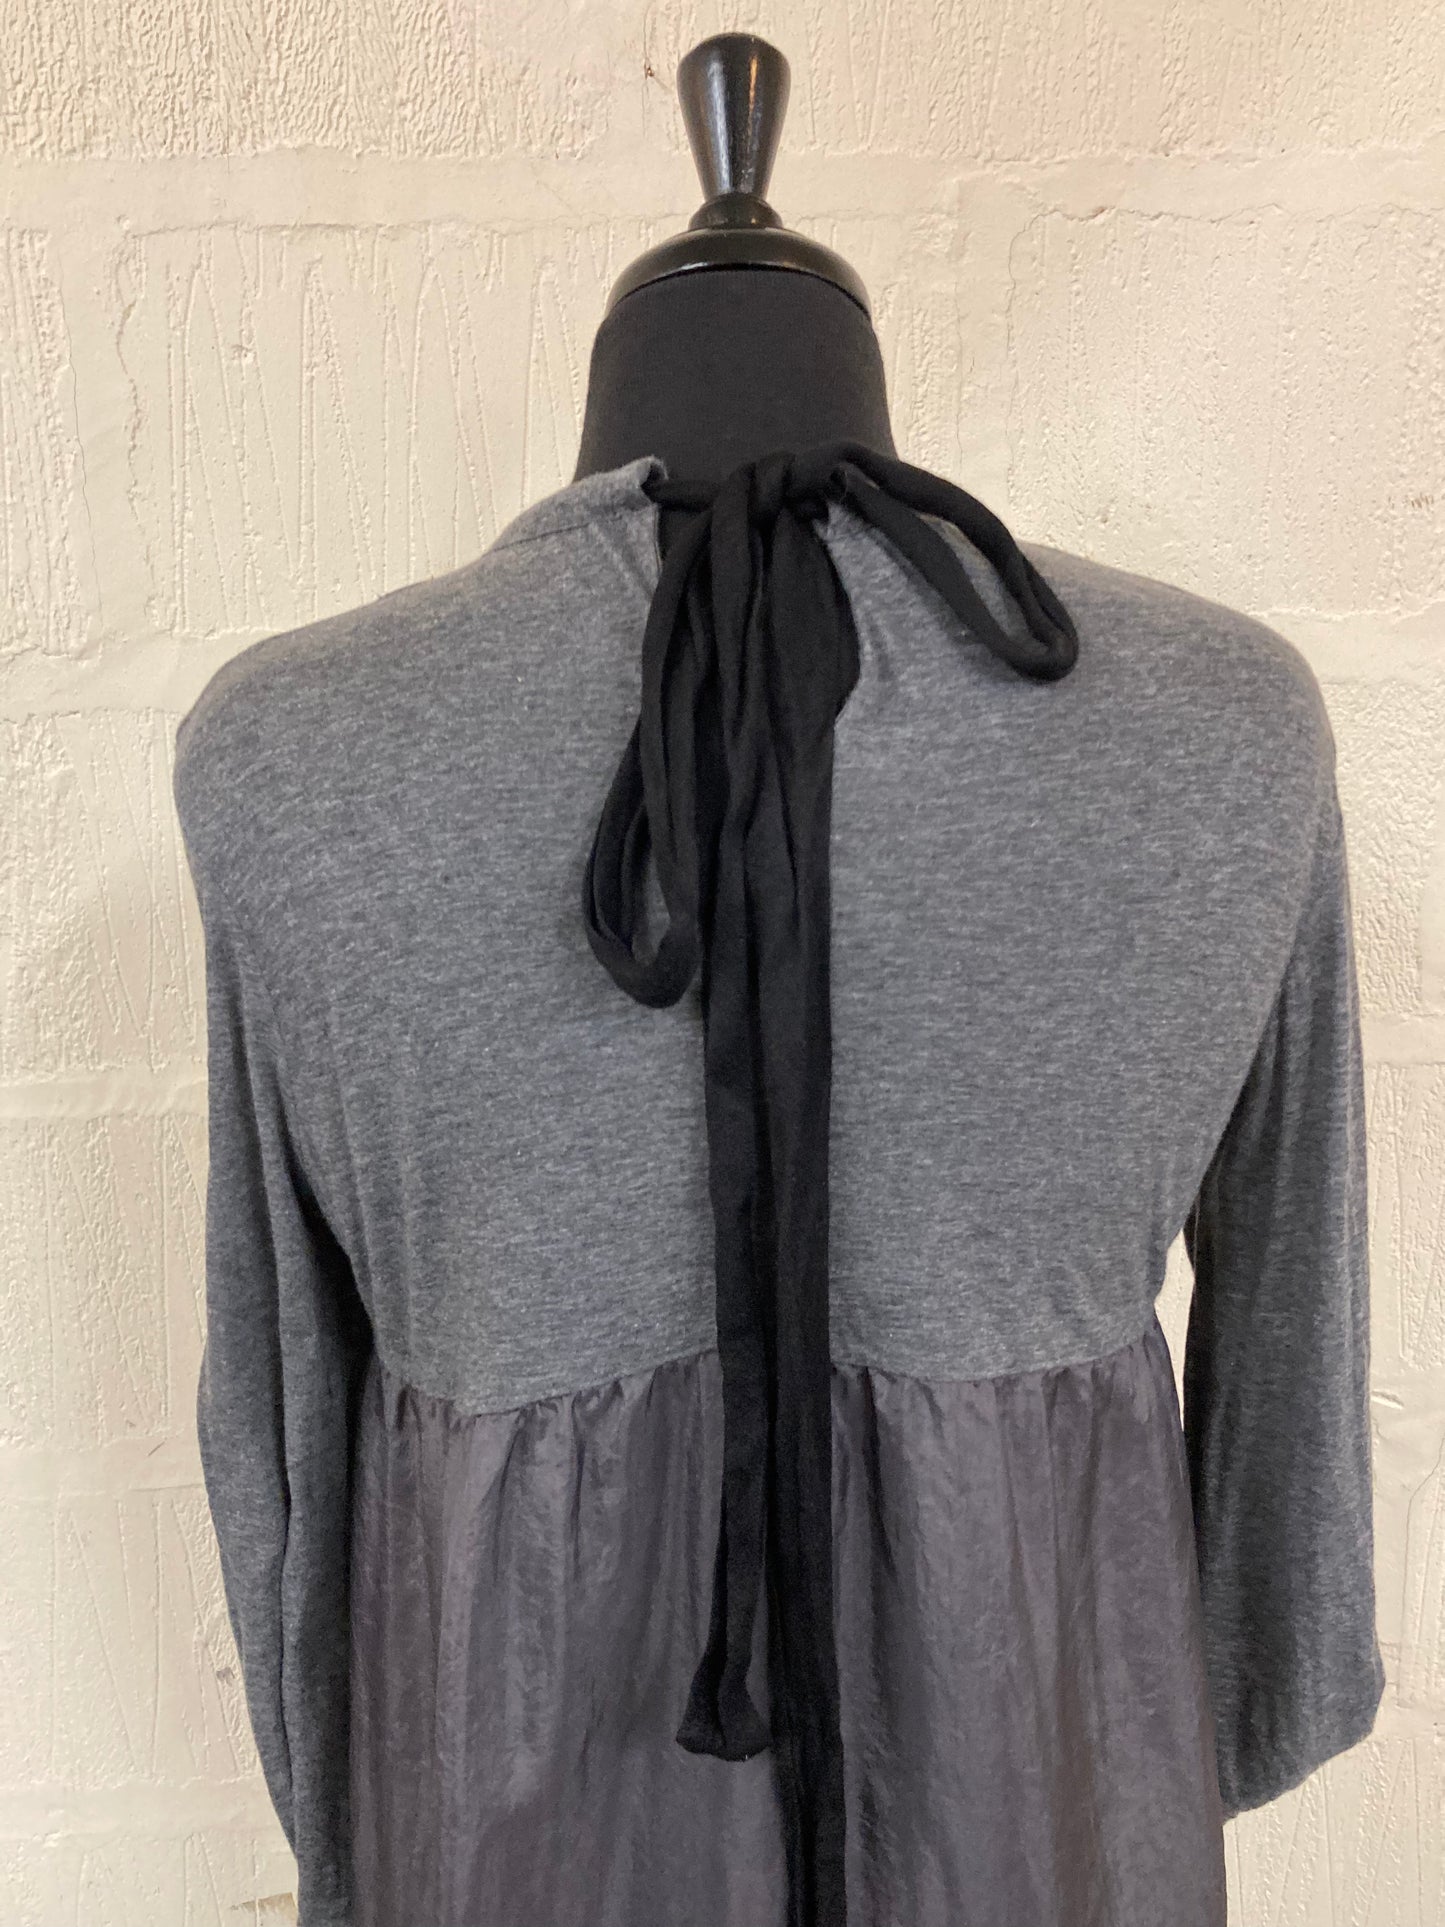 00s MARNI Grey Dress with Pockets and rear Neck Tie Size 8-10